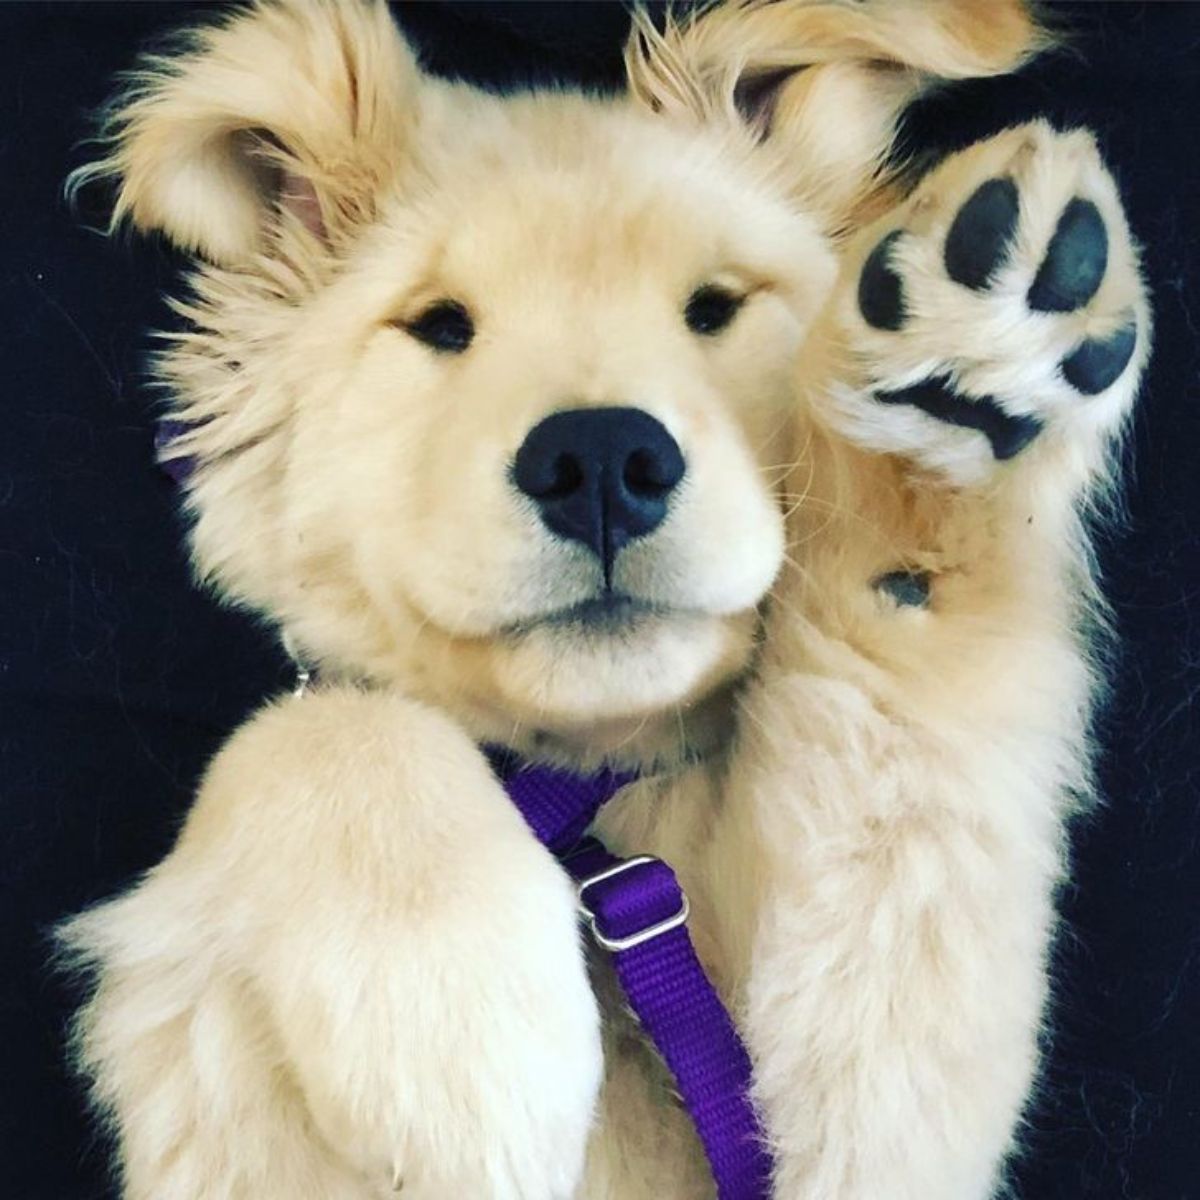 golden retriever puppy laying belly up with one paw up and wearing a purple leash